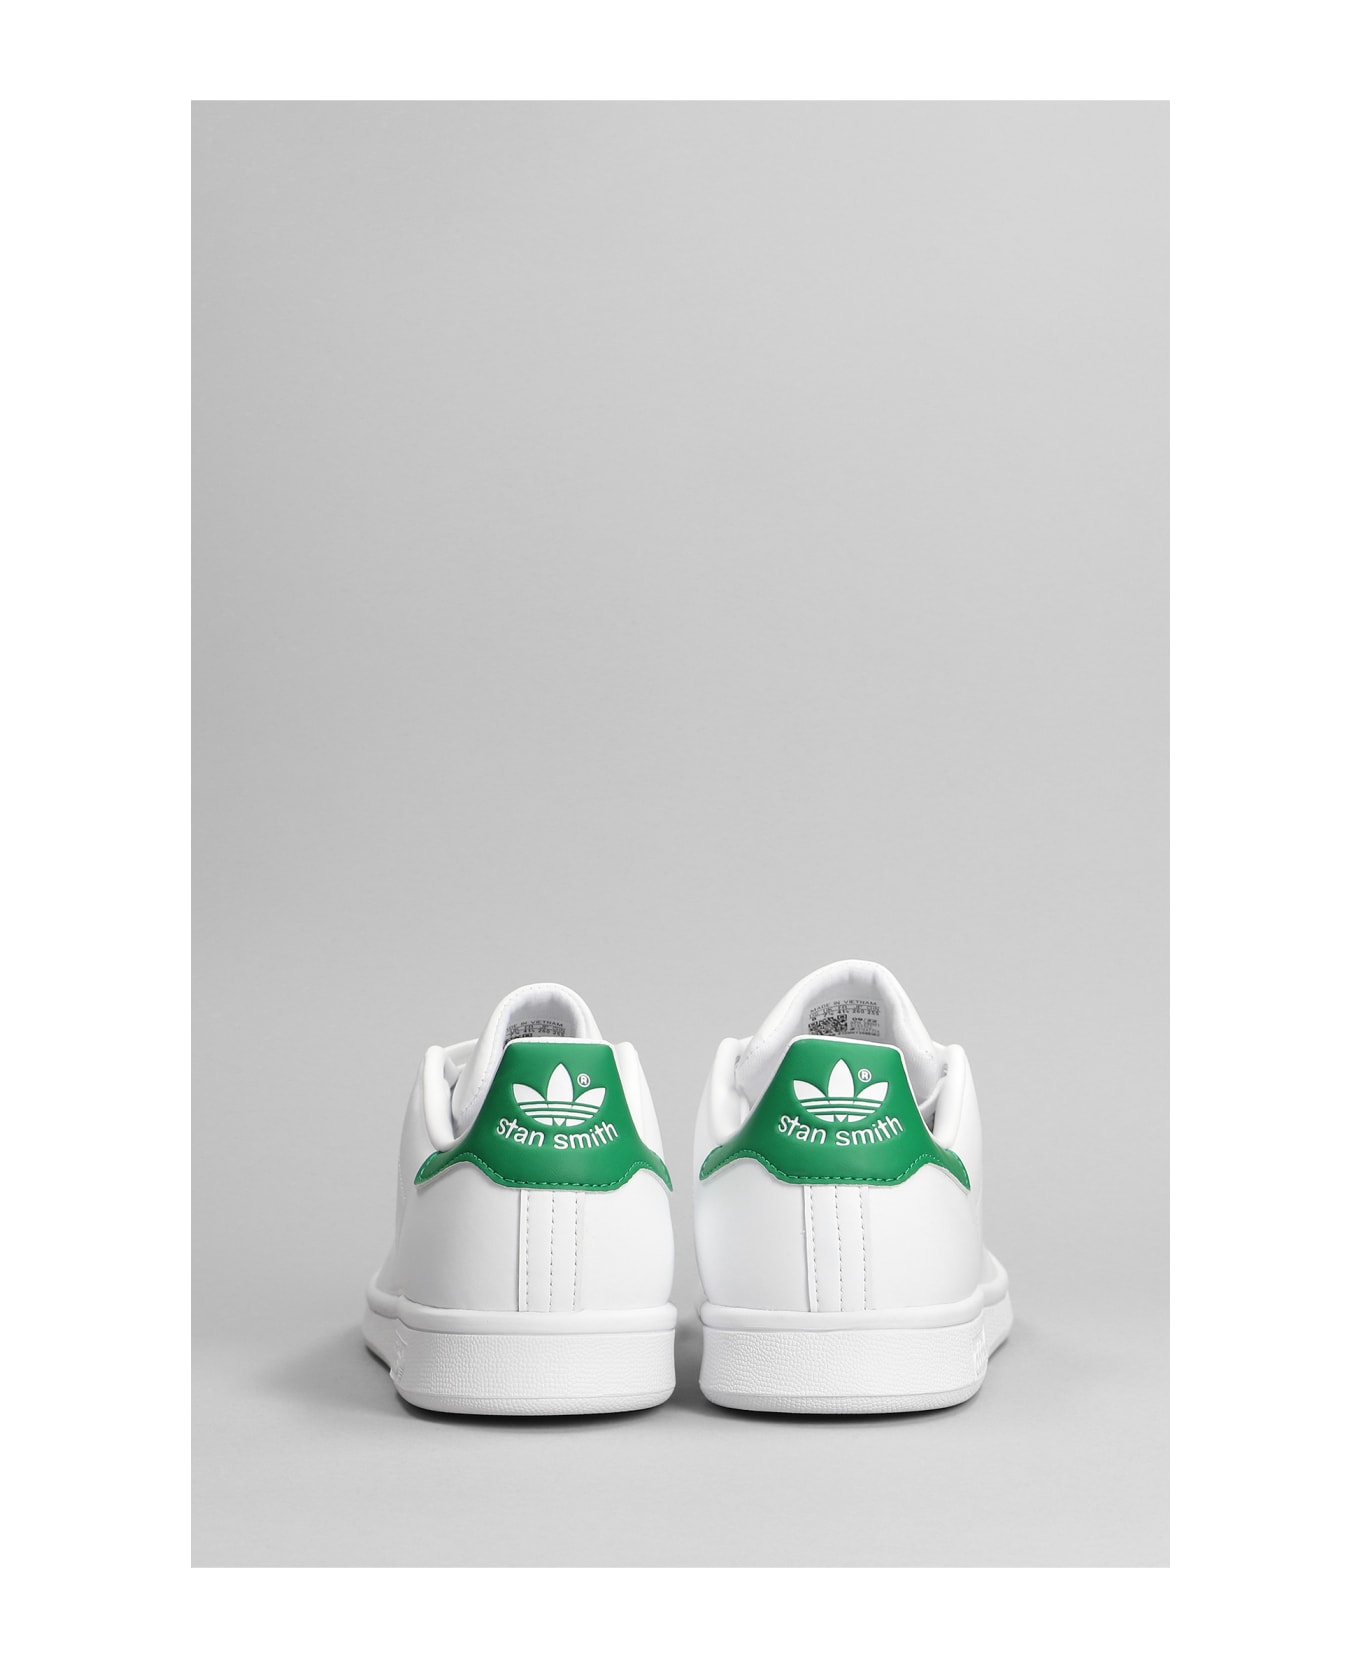 Adidas Stan Smith Sneakers In White Leather - White and green